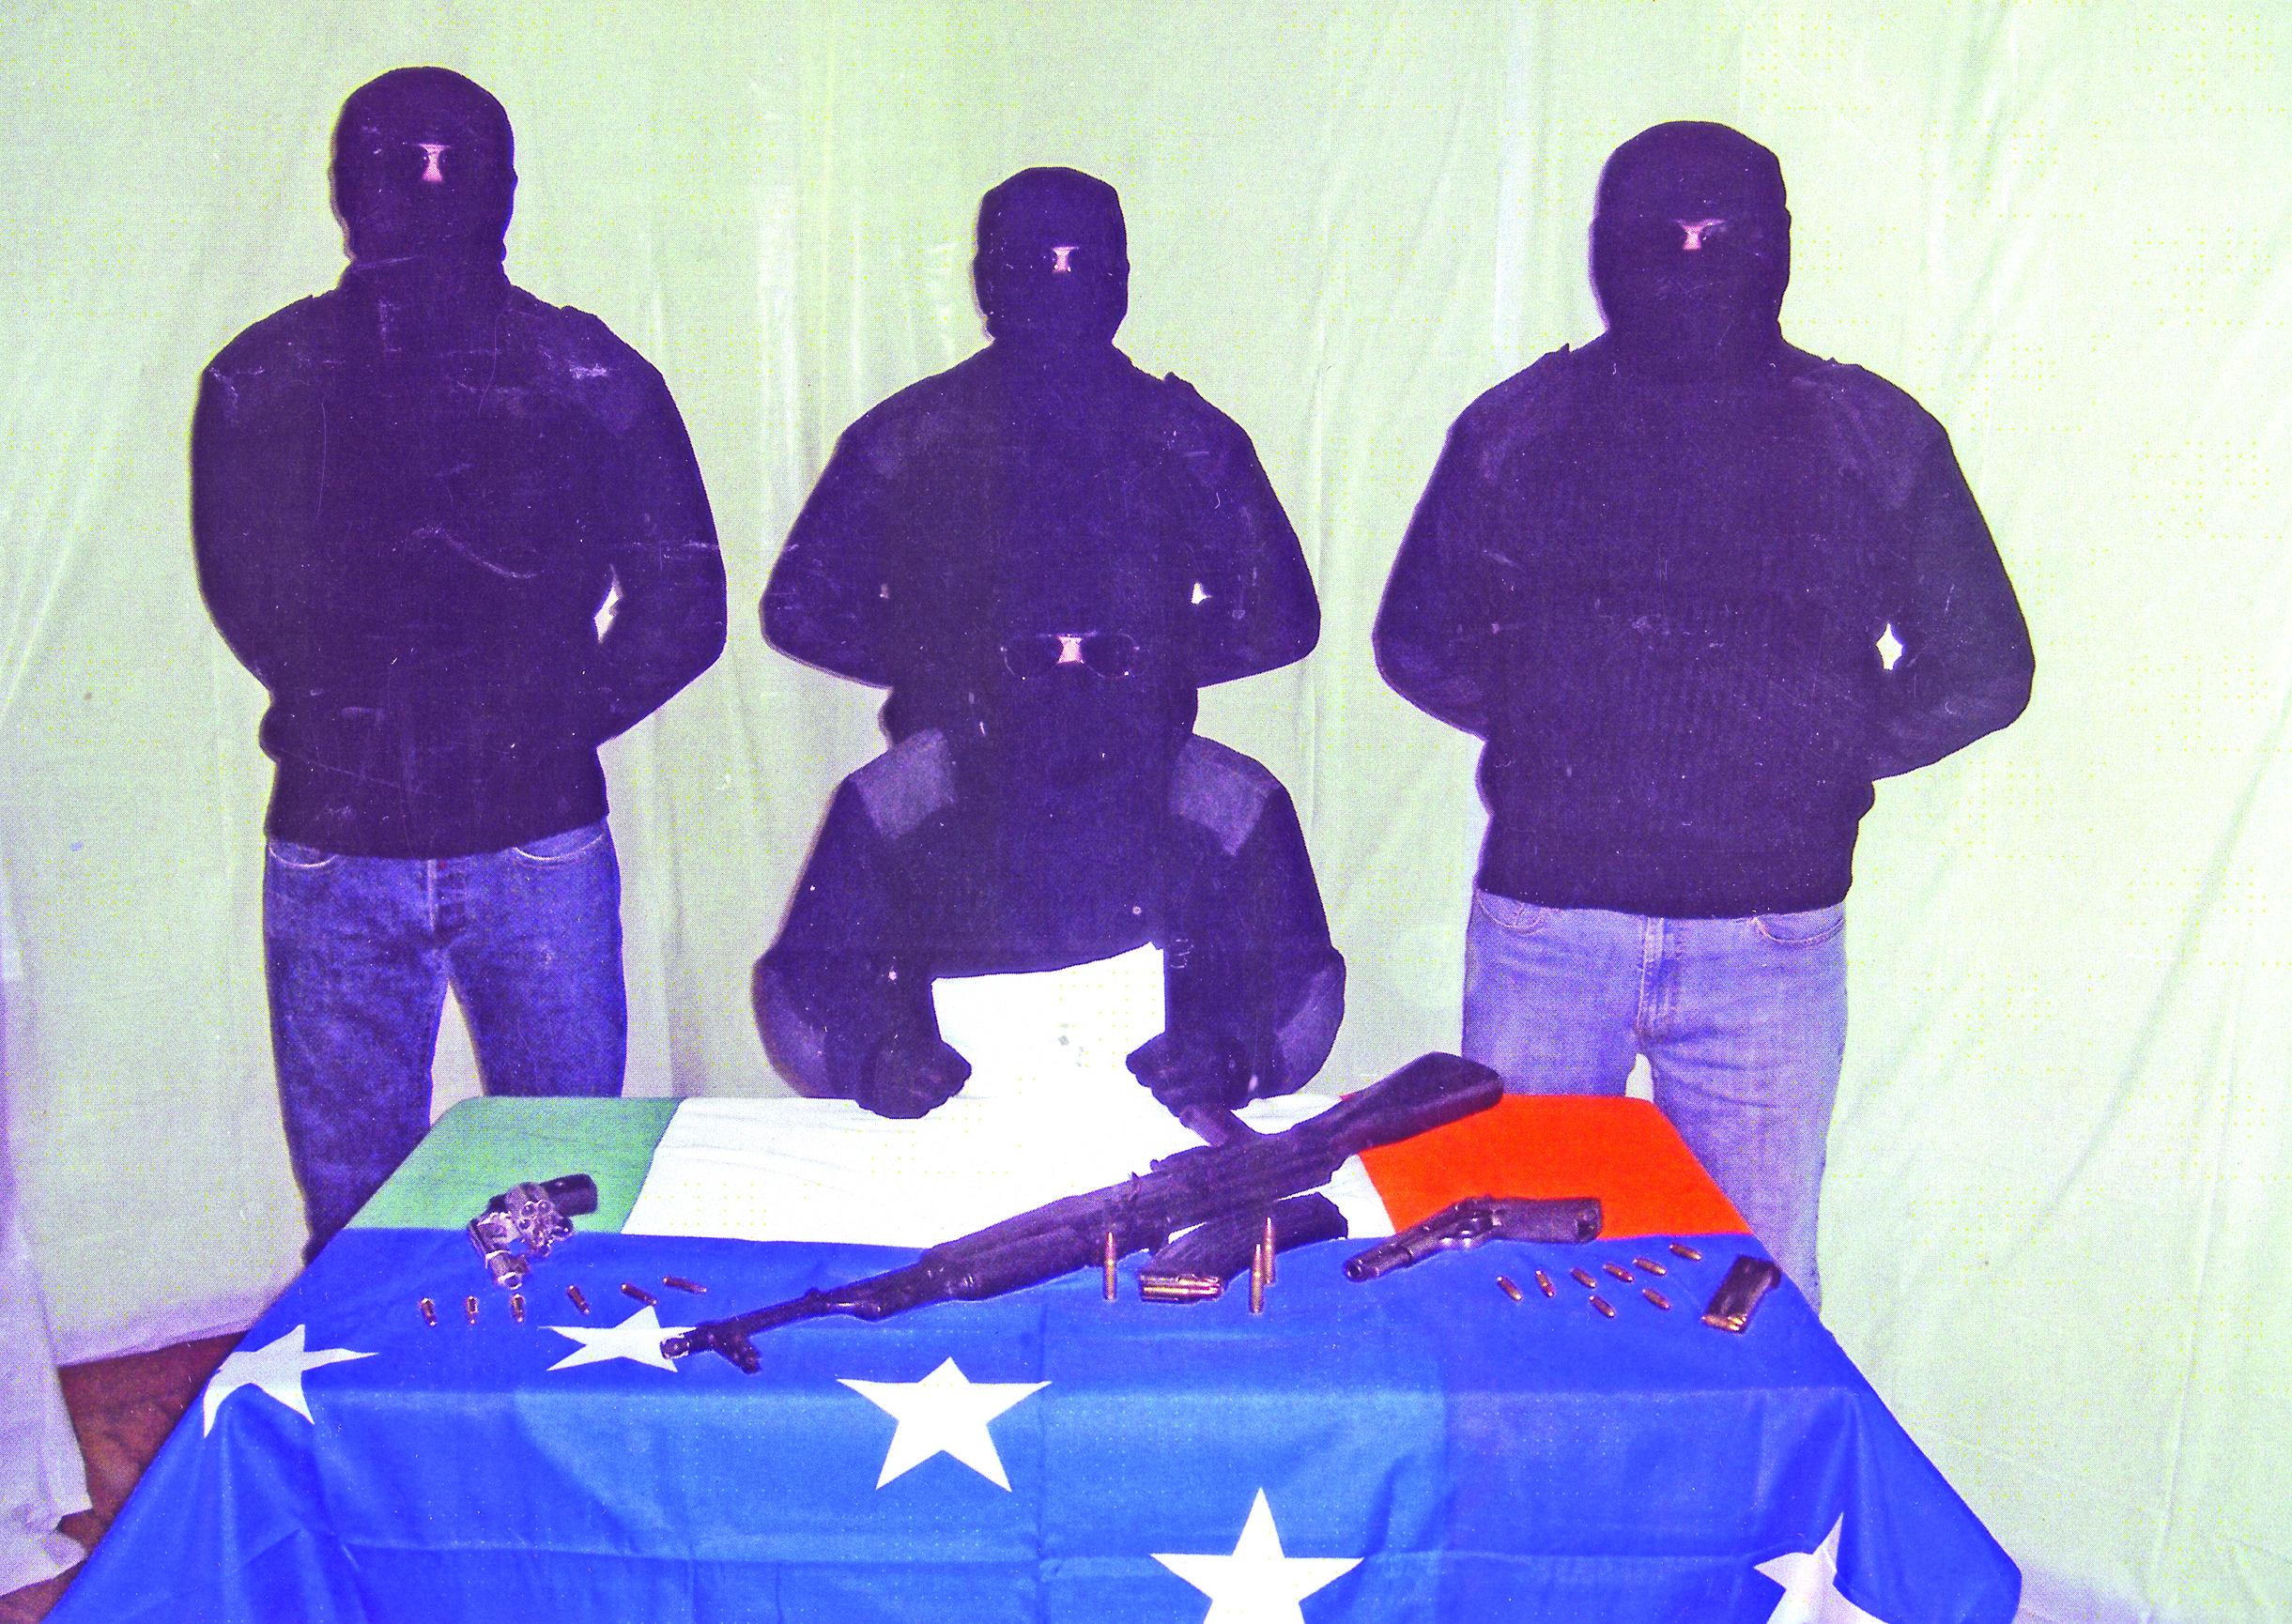 Members of the new group with weapons – one of the flags on the table is the Starry Plough as it’s believed the gang has ties to the INLA 